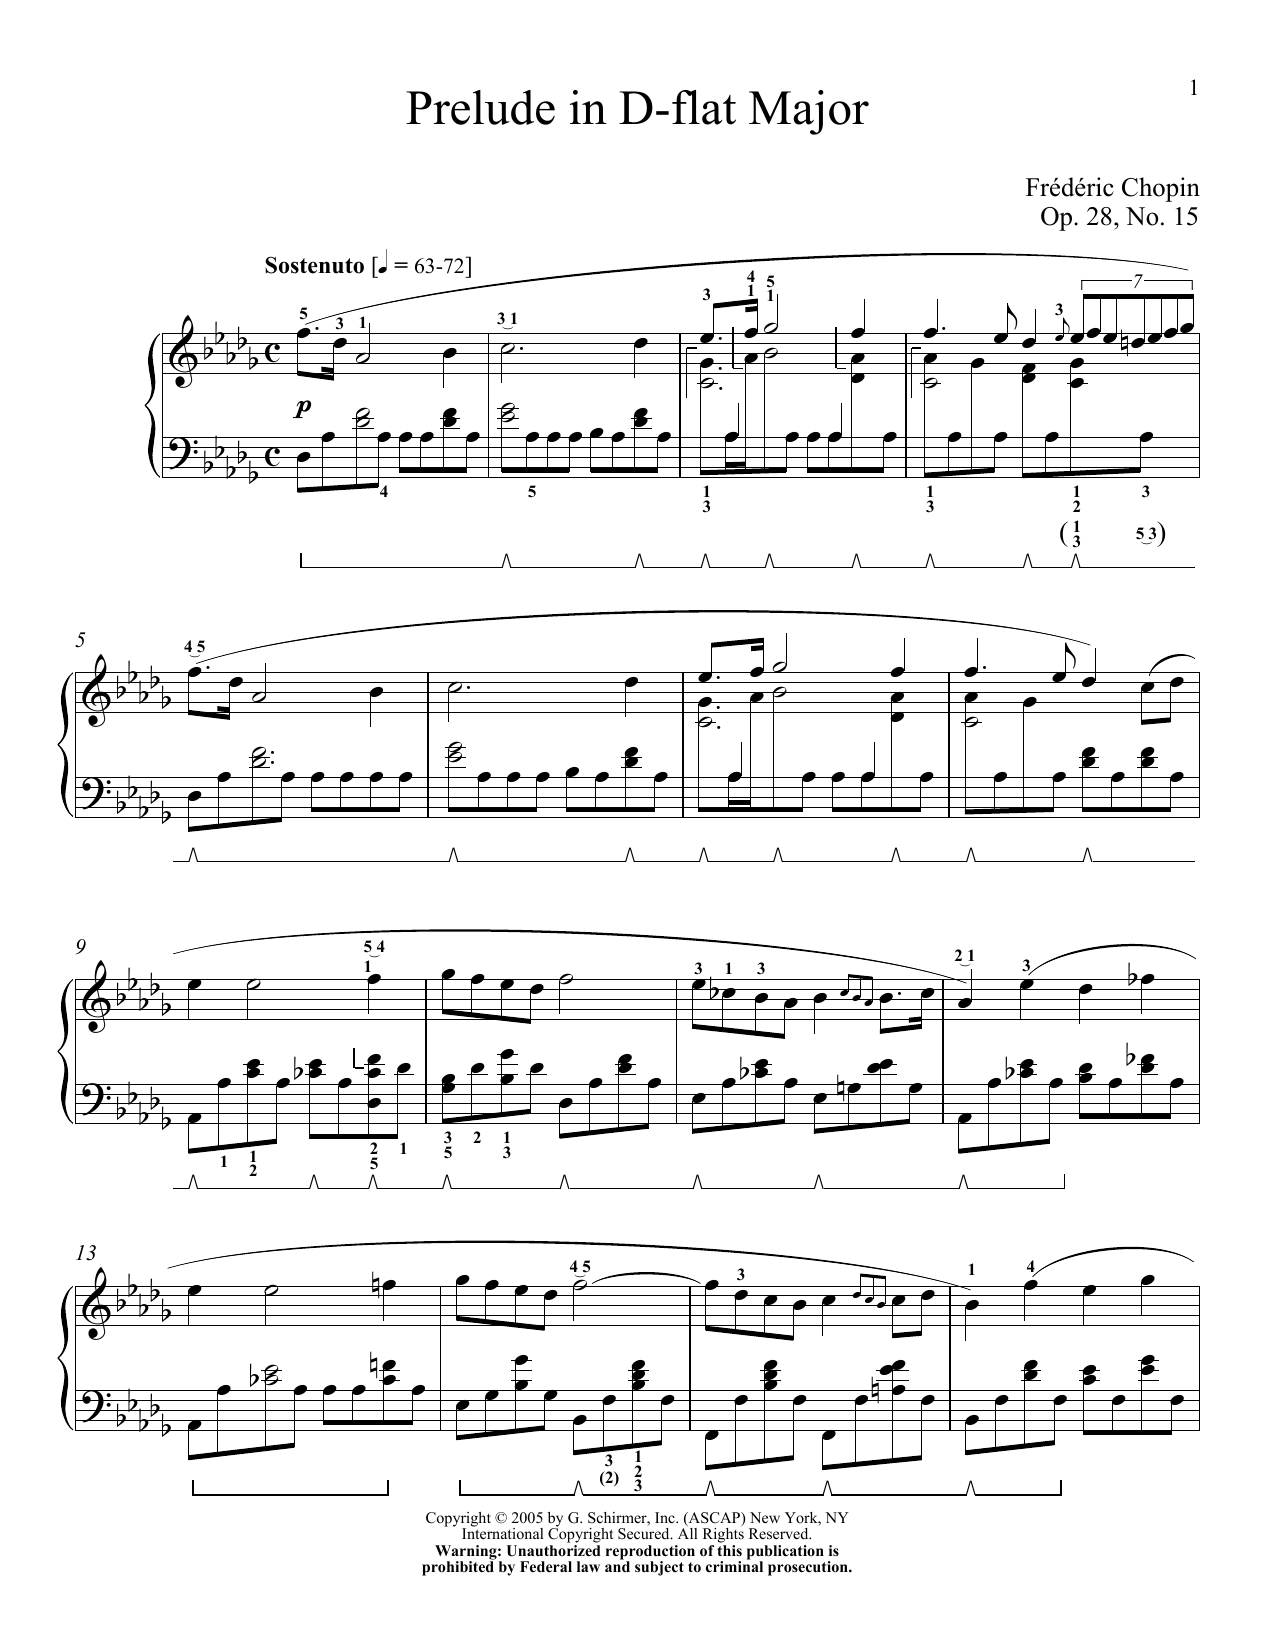 Frederic Chopin Prelude in D Flat Major, Op.28, No.15 (Raindrop) sheet music notes and chords. Download Printable PDF.